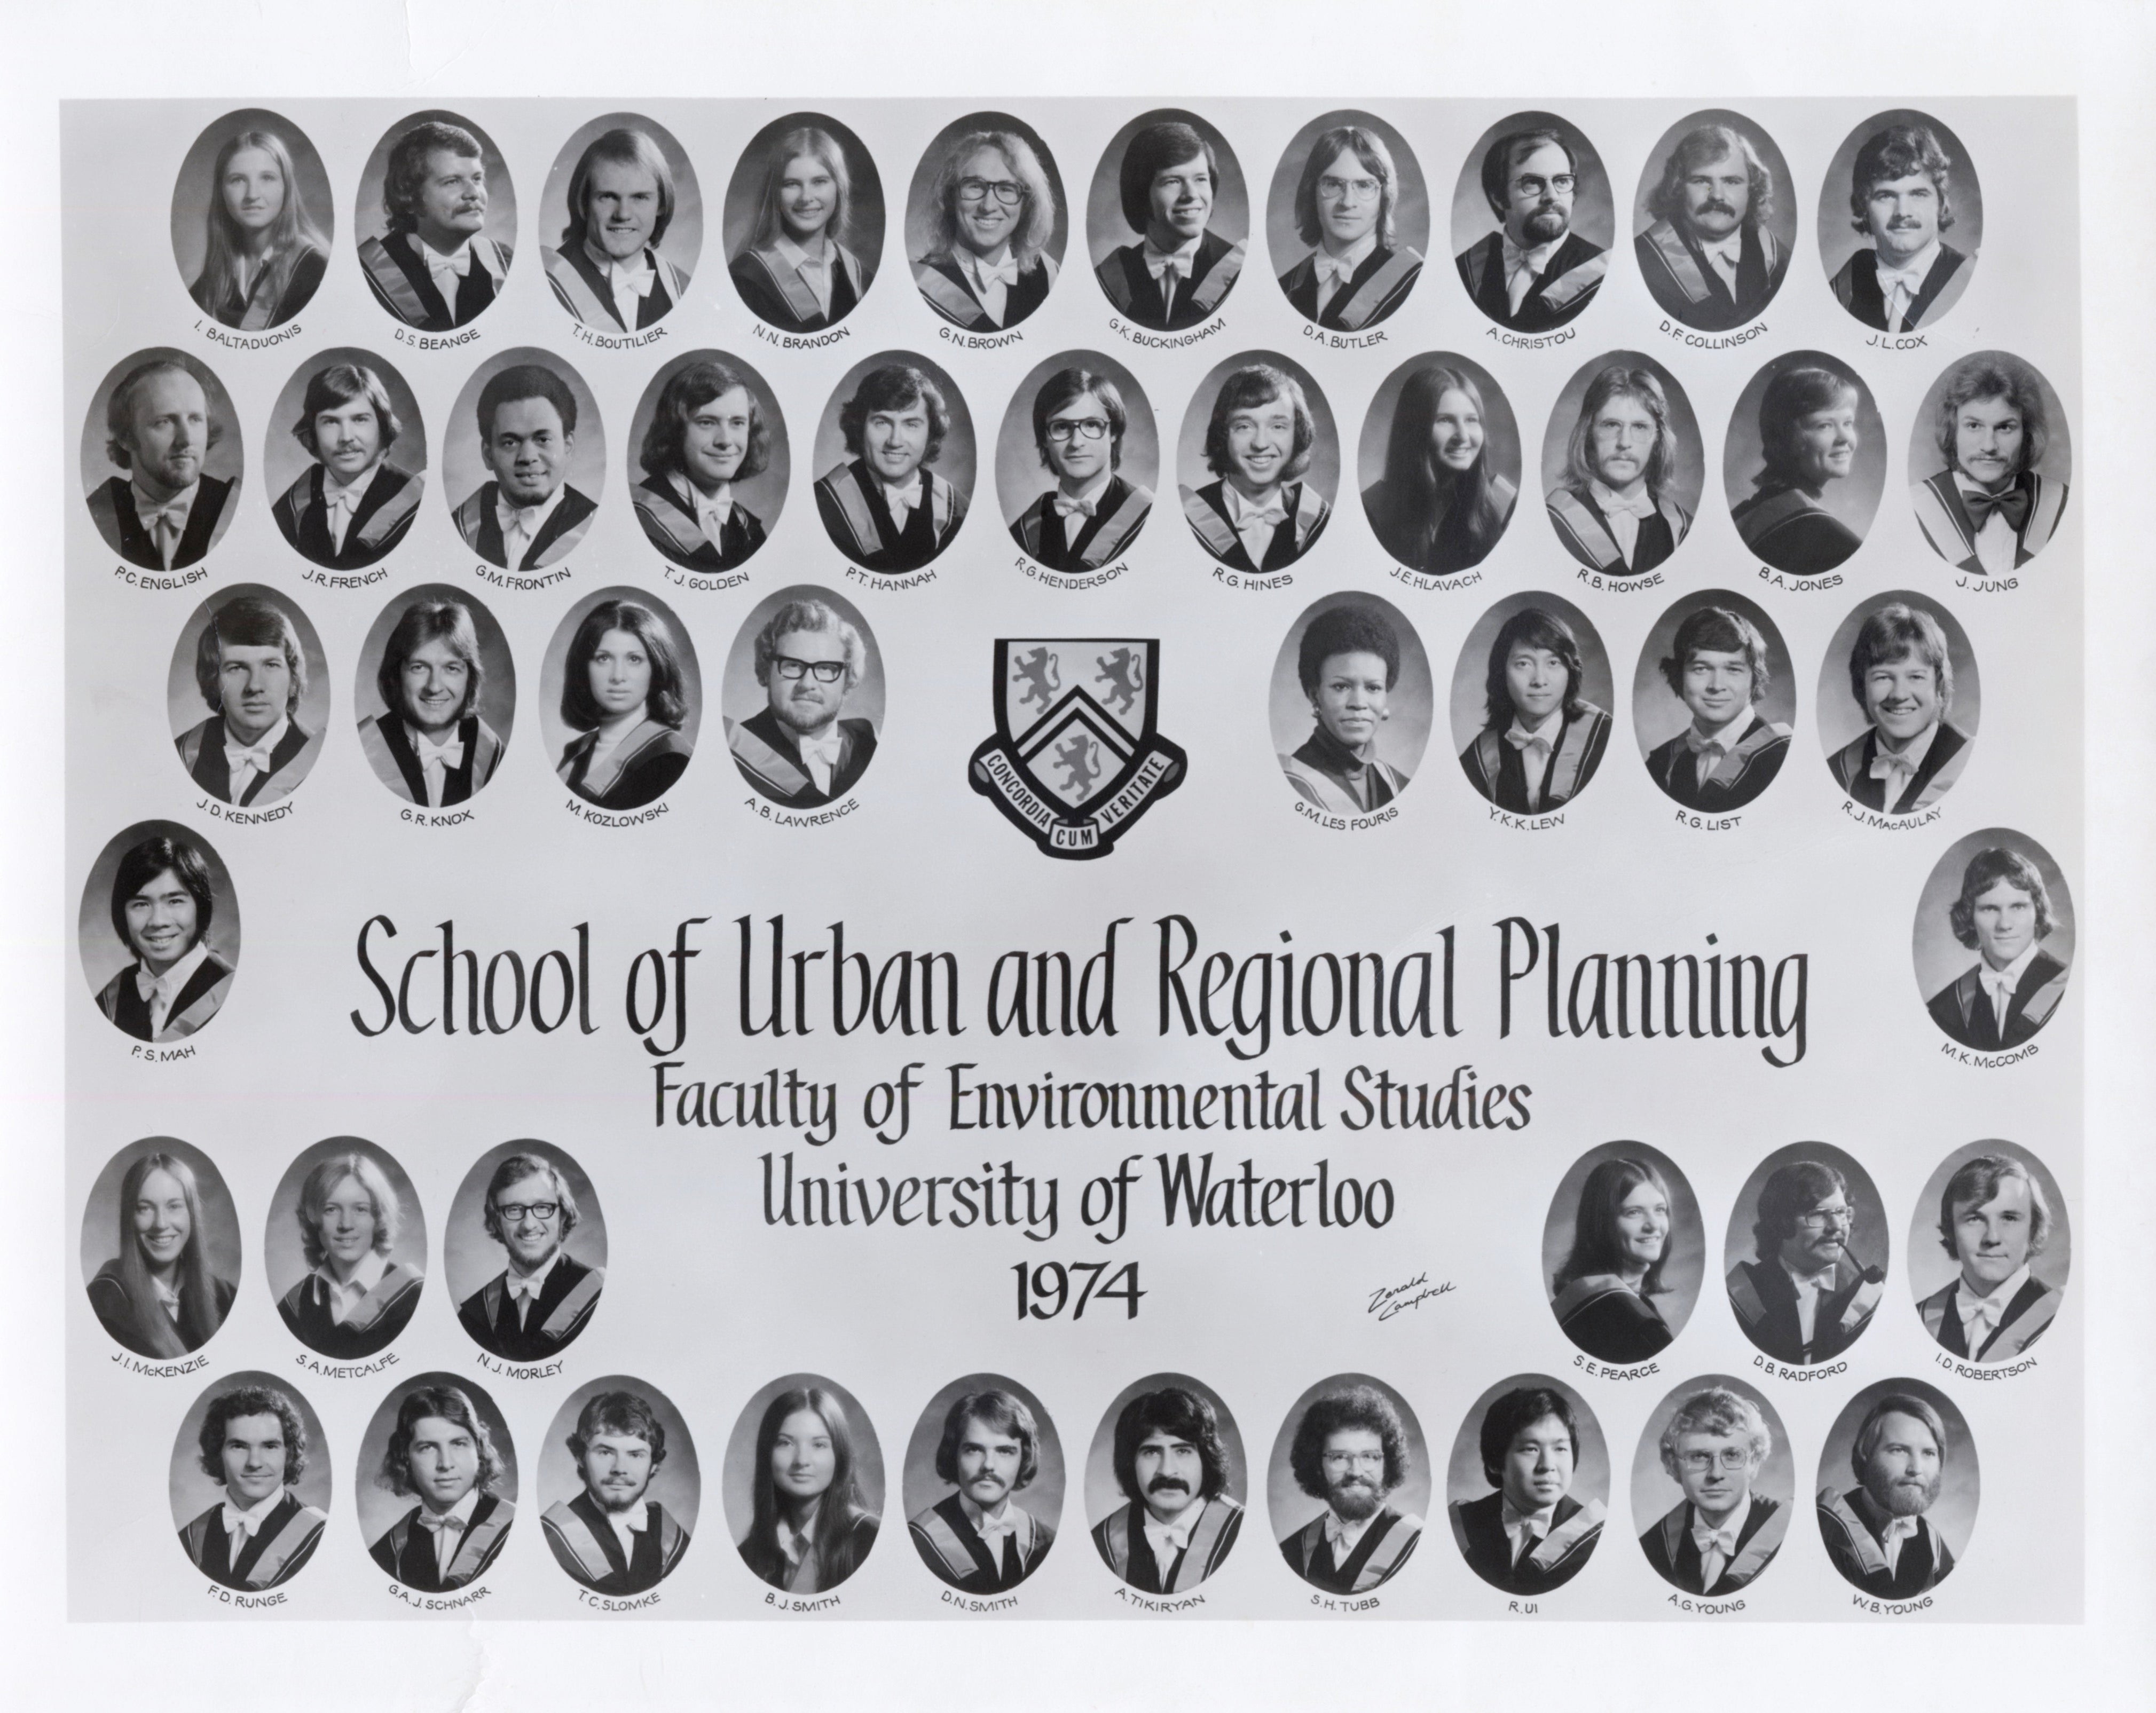 Class photo of planning 1974 